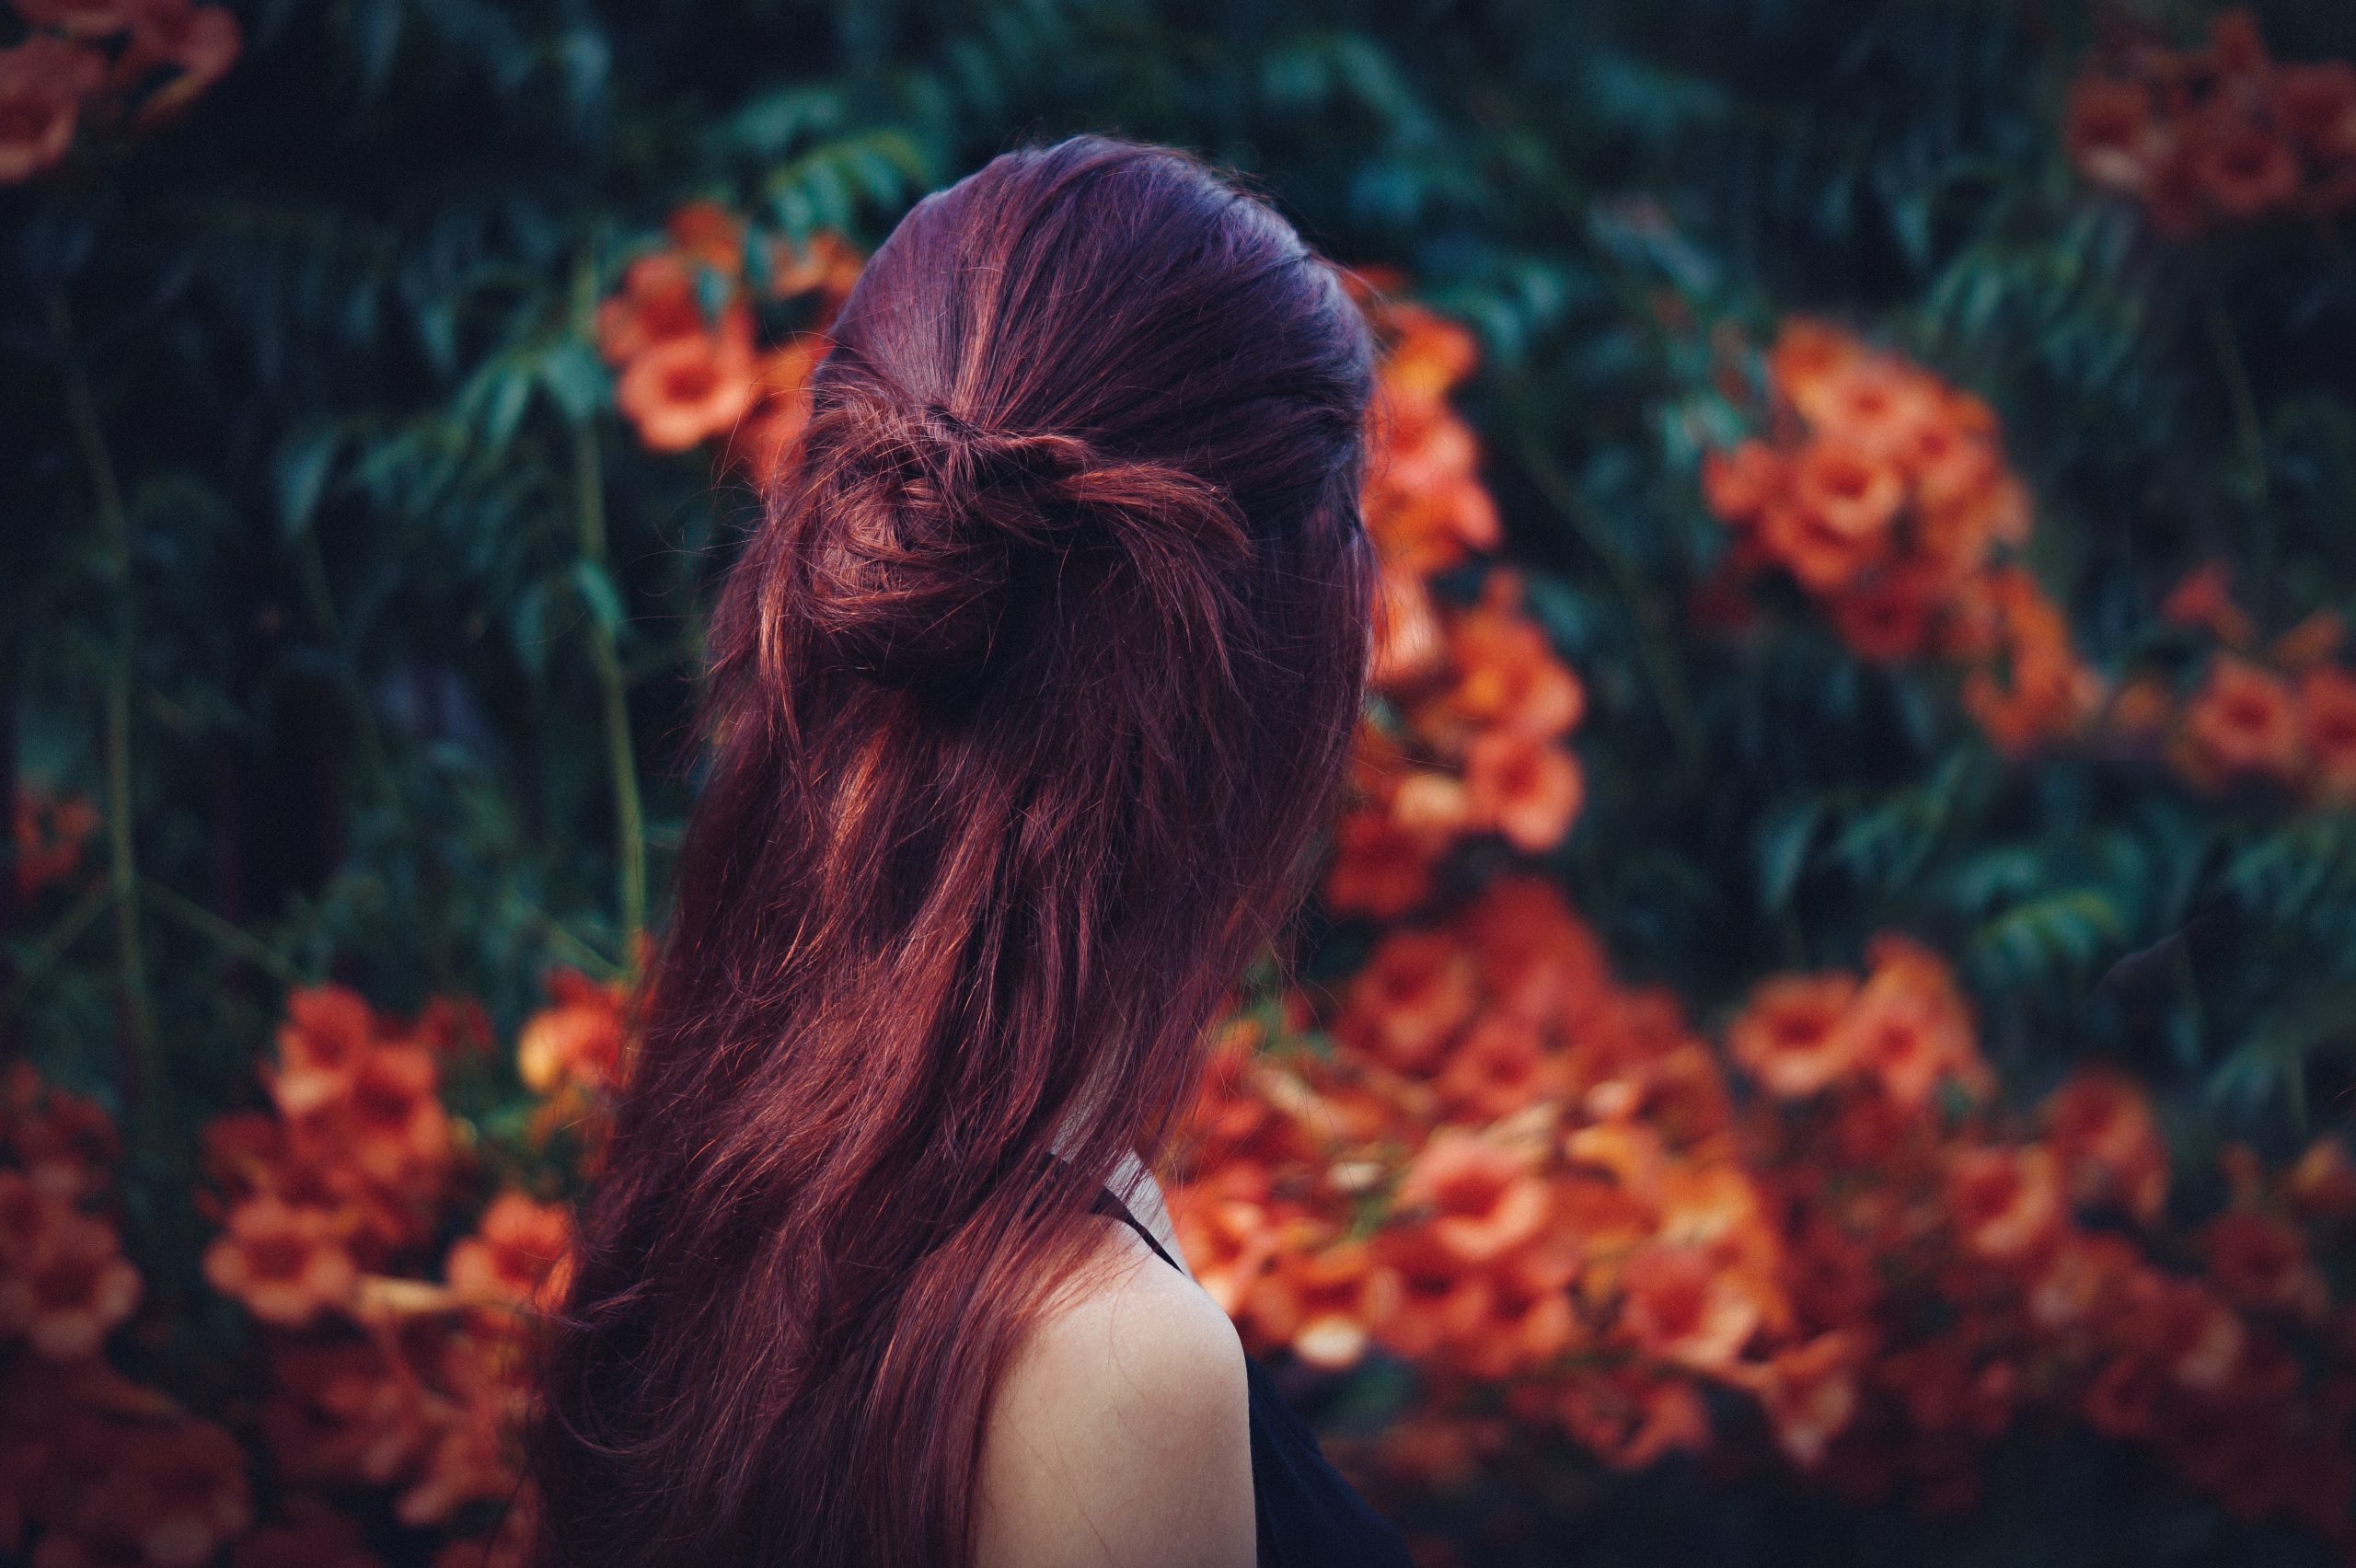 Red hair from unsplash